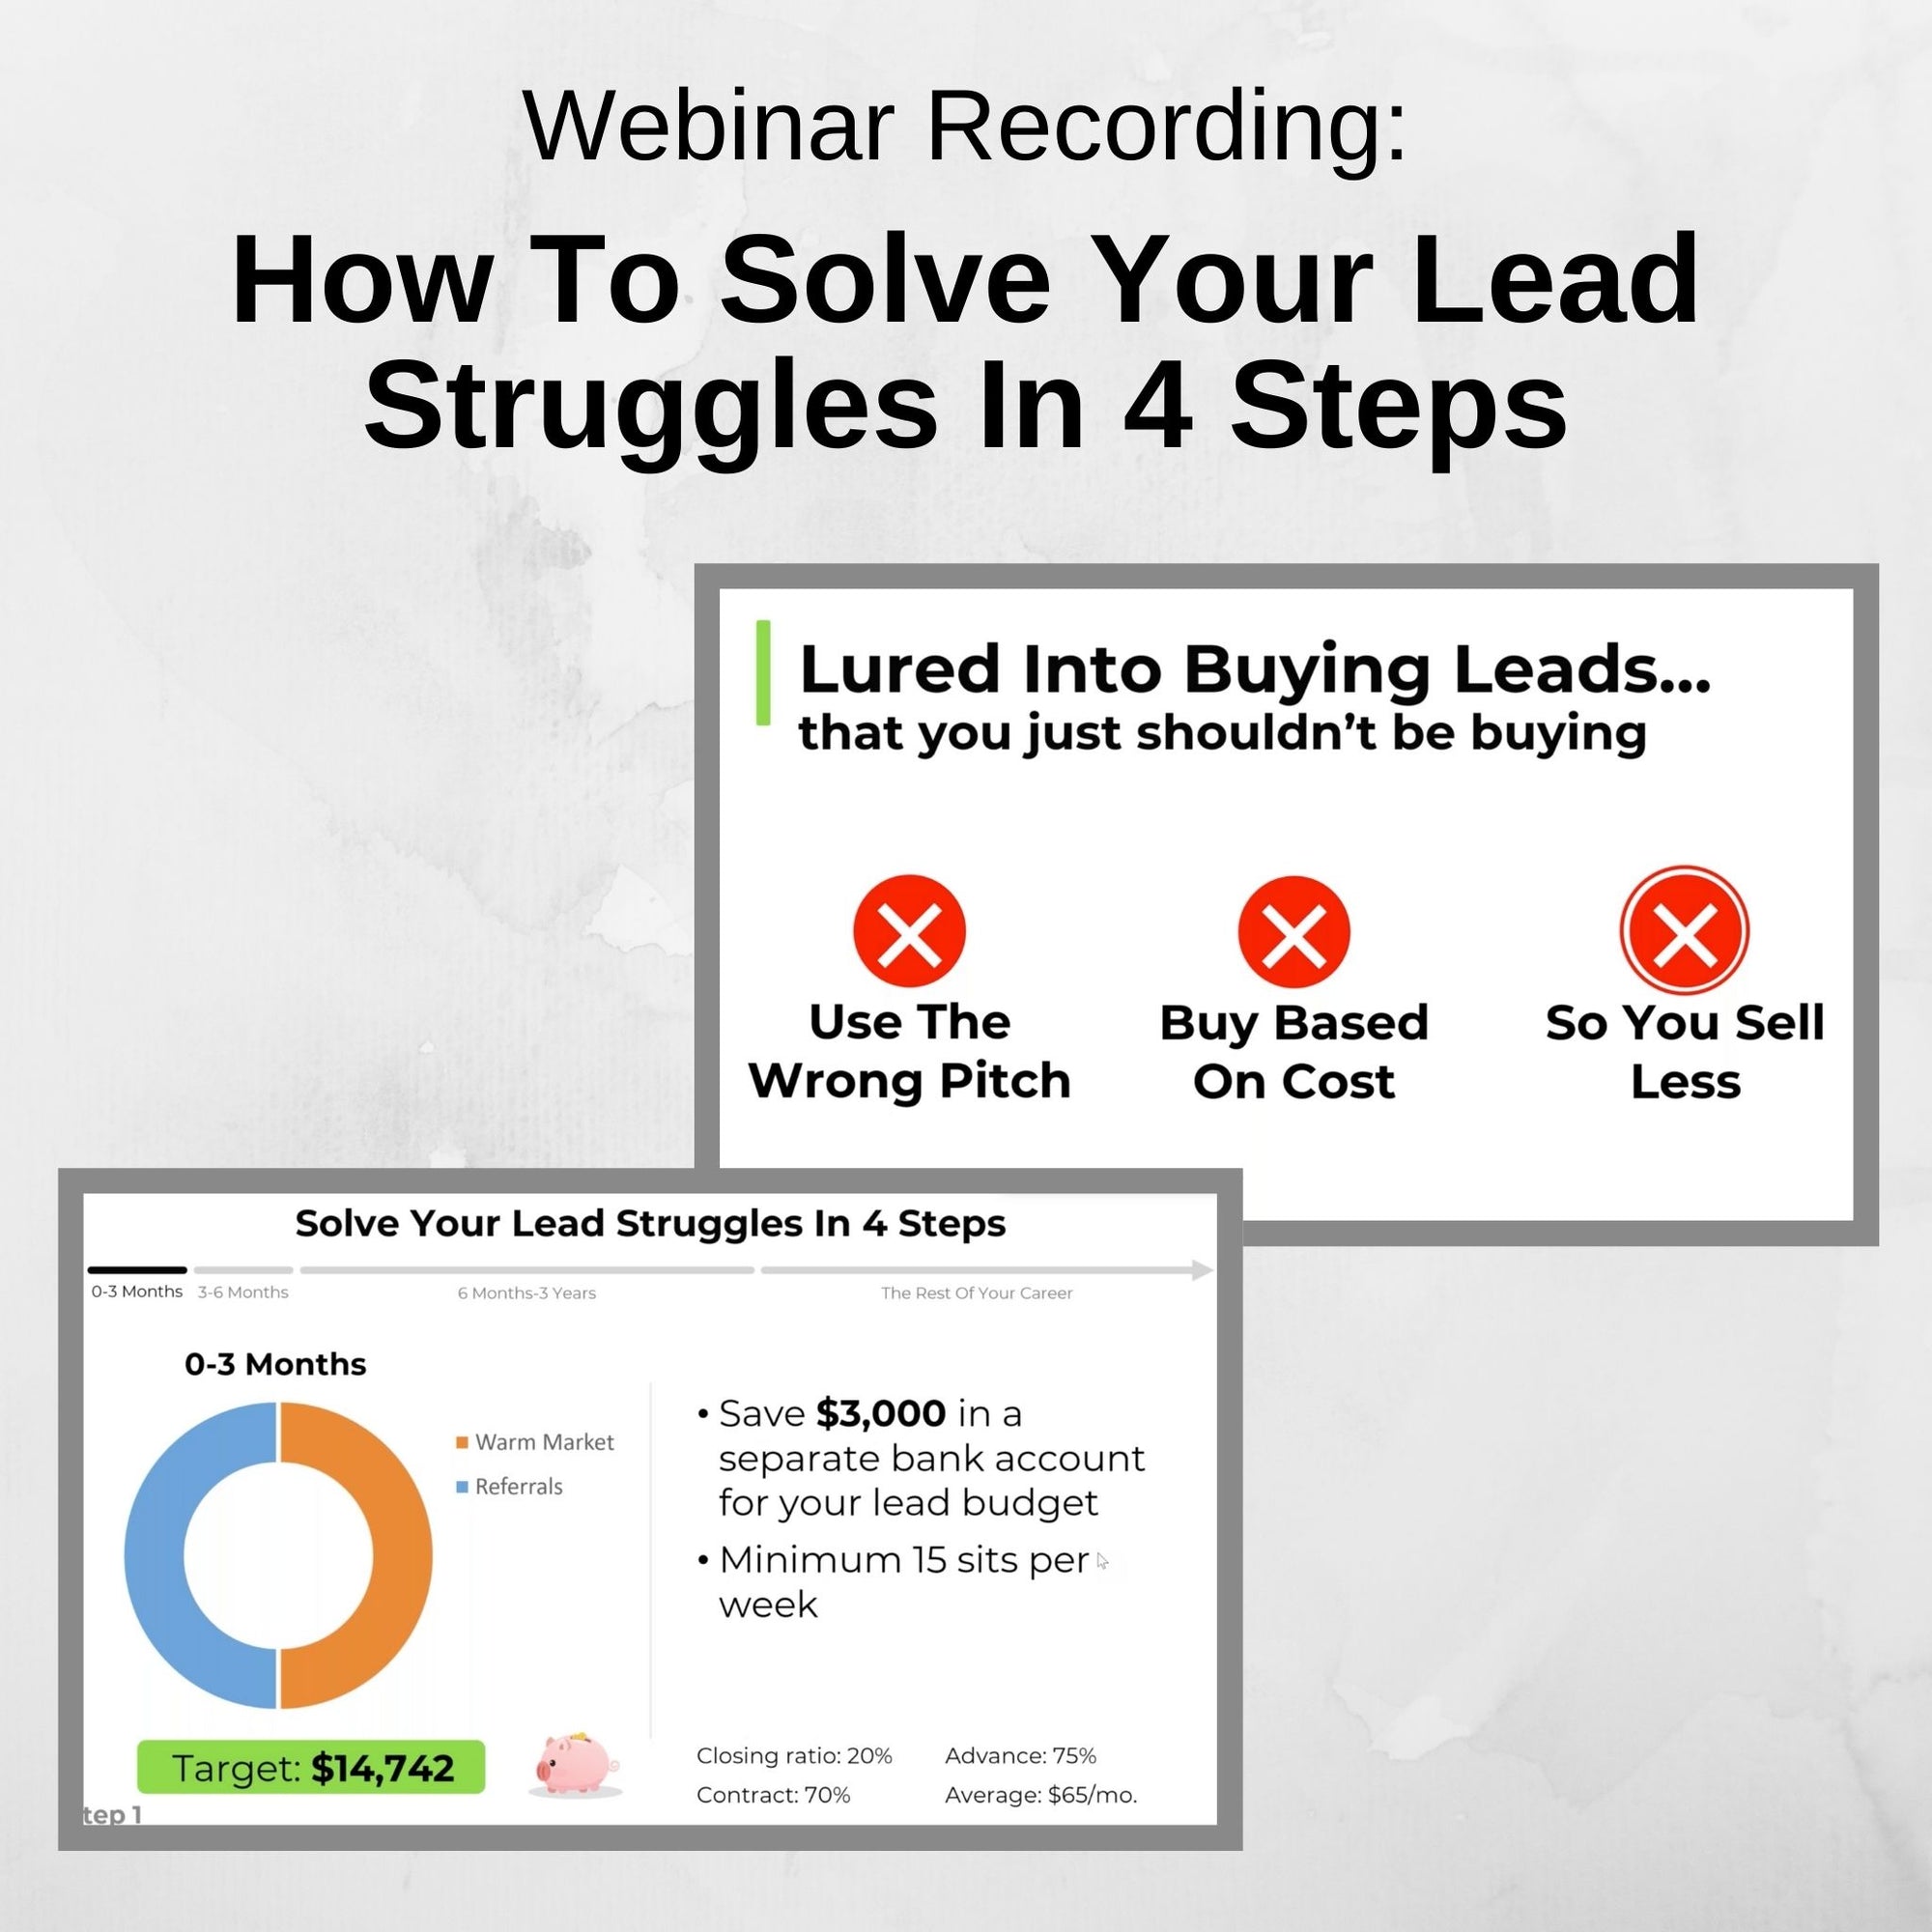 Training Video: How To Solve Your Lead Struggles In 4 Steps